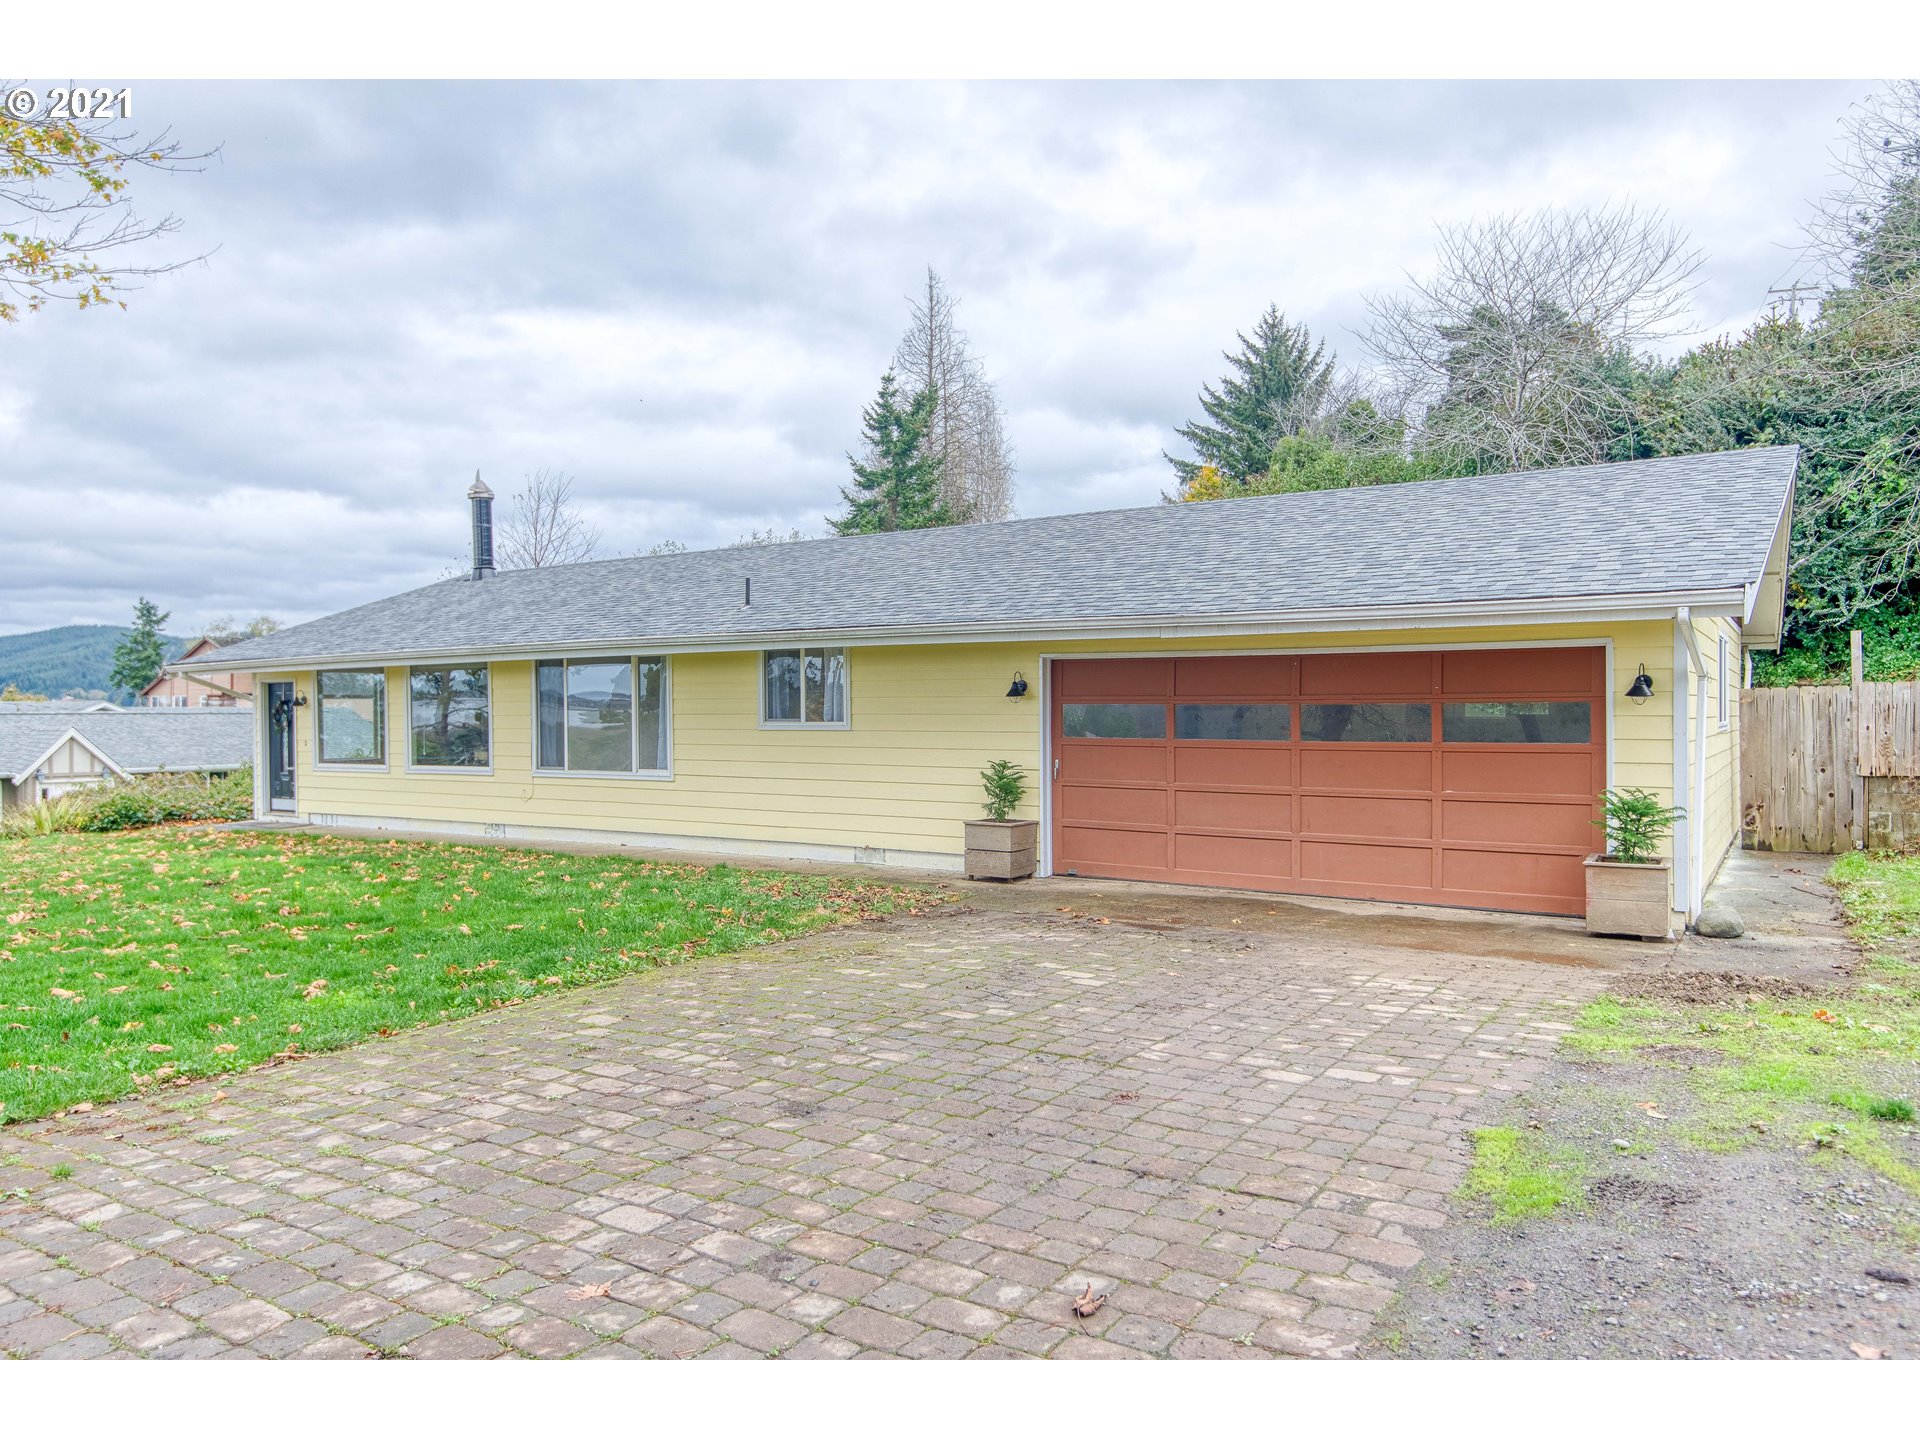 1297 COOS RIVER HWY (1 of 30)